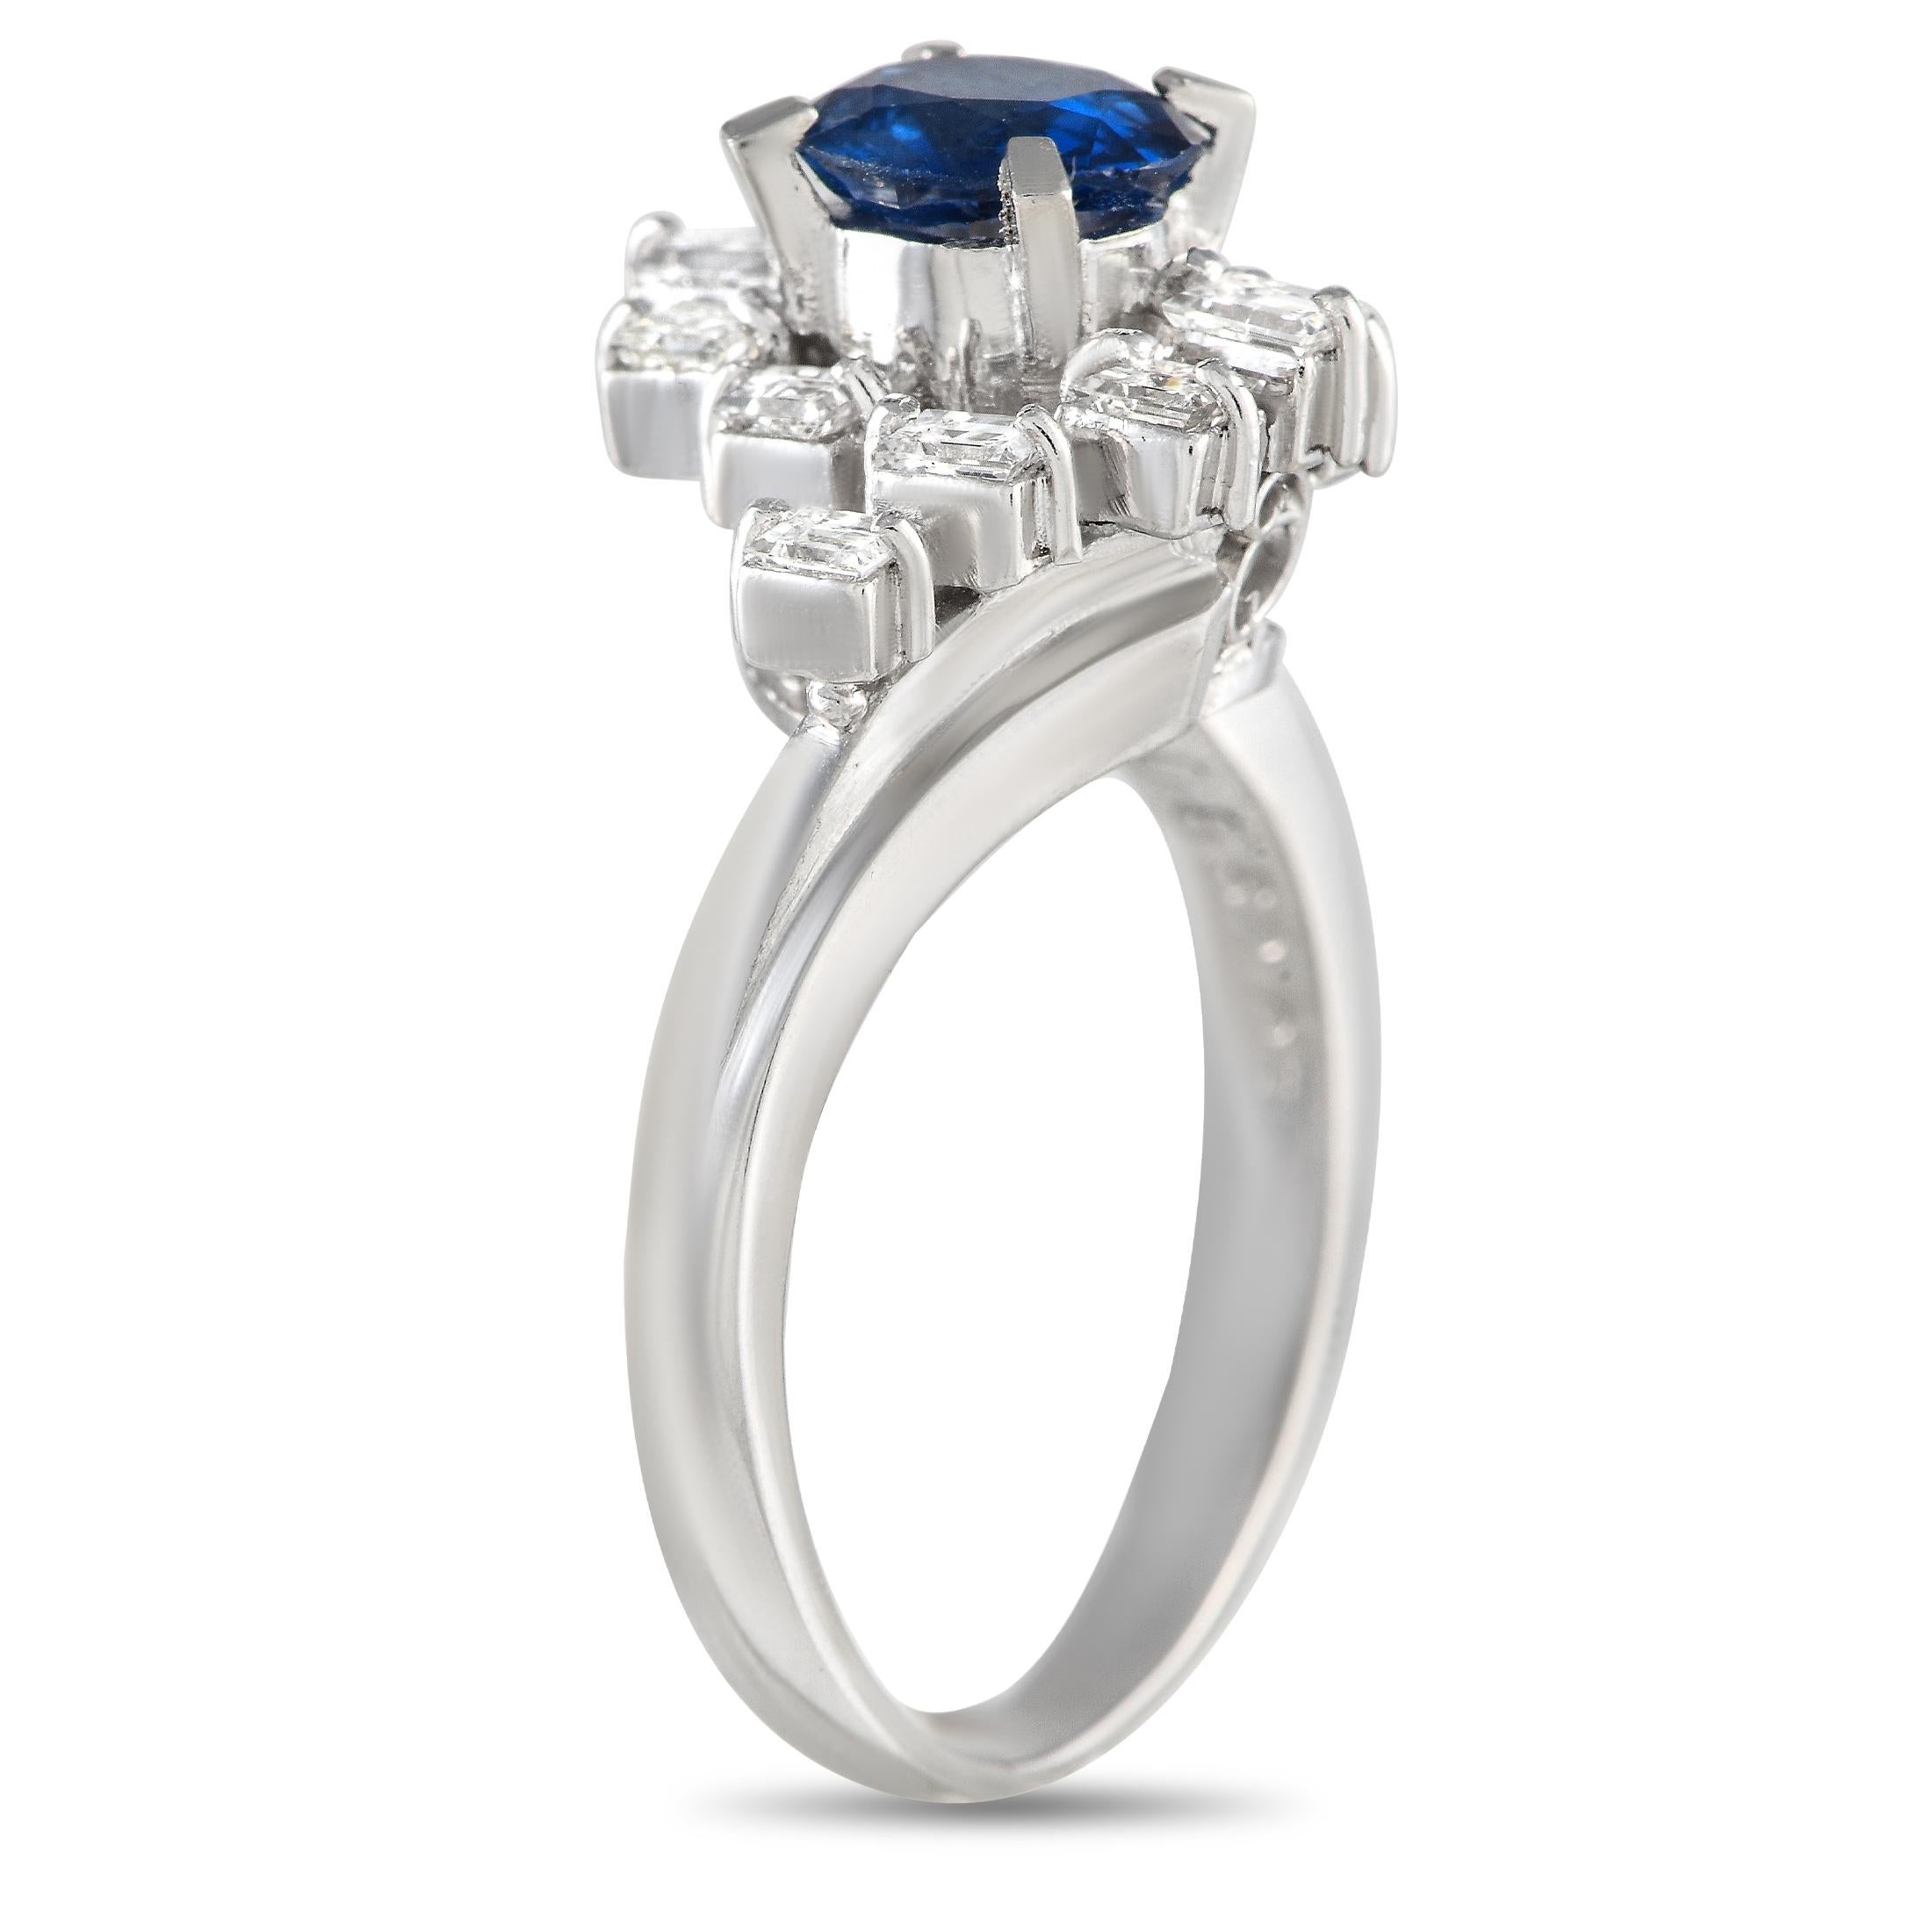 A captivating 0.86 carat Sapphire serves as a stunning focal point on this exquisite luxury ring. Crafted from shimmering Platinum, Diamond accents with a total weight of 0.52 carats further elevate the design. This piece features a 2mm band width